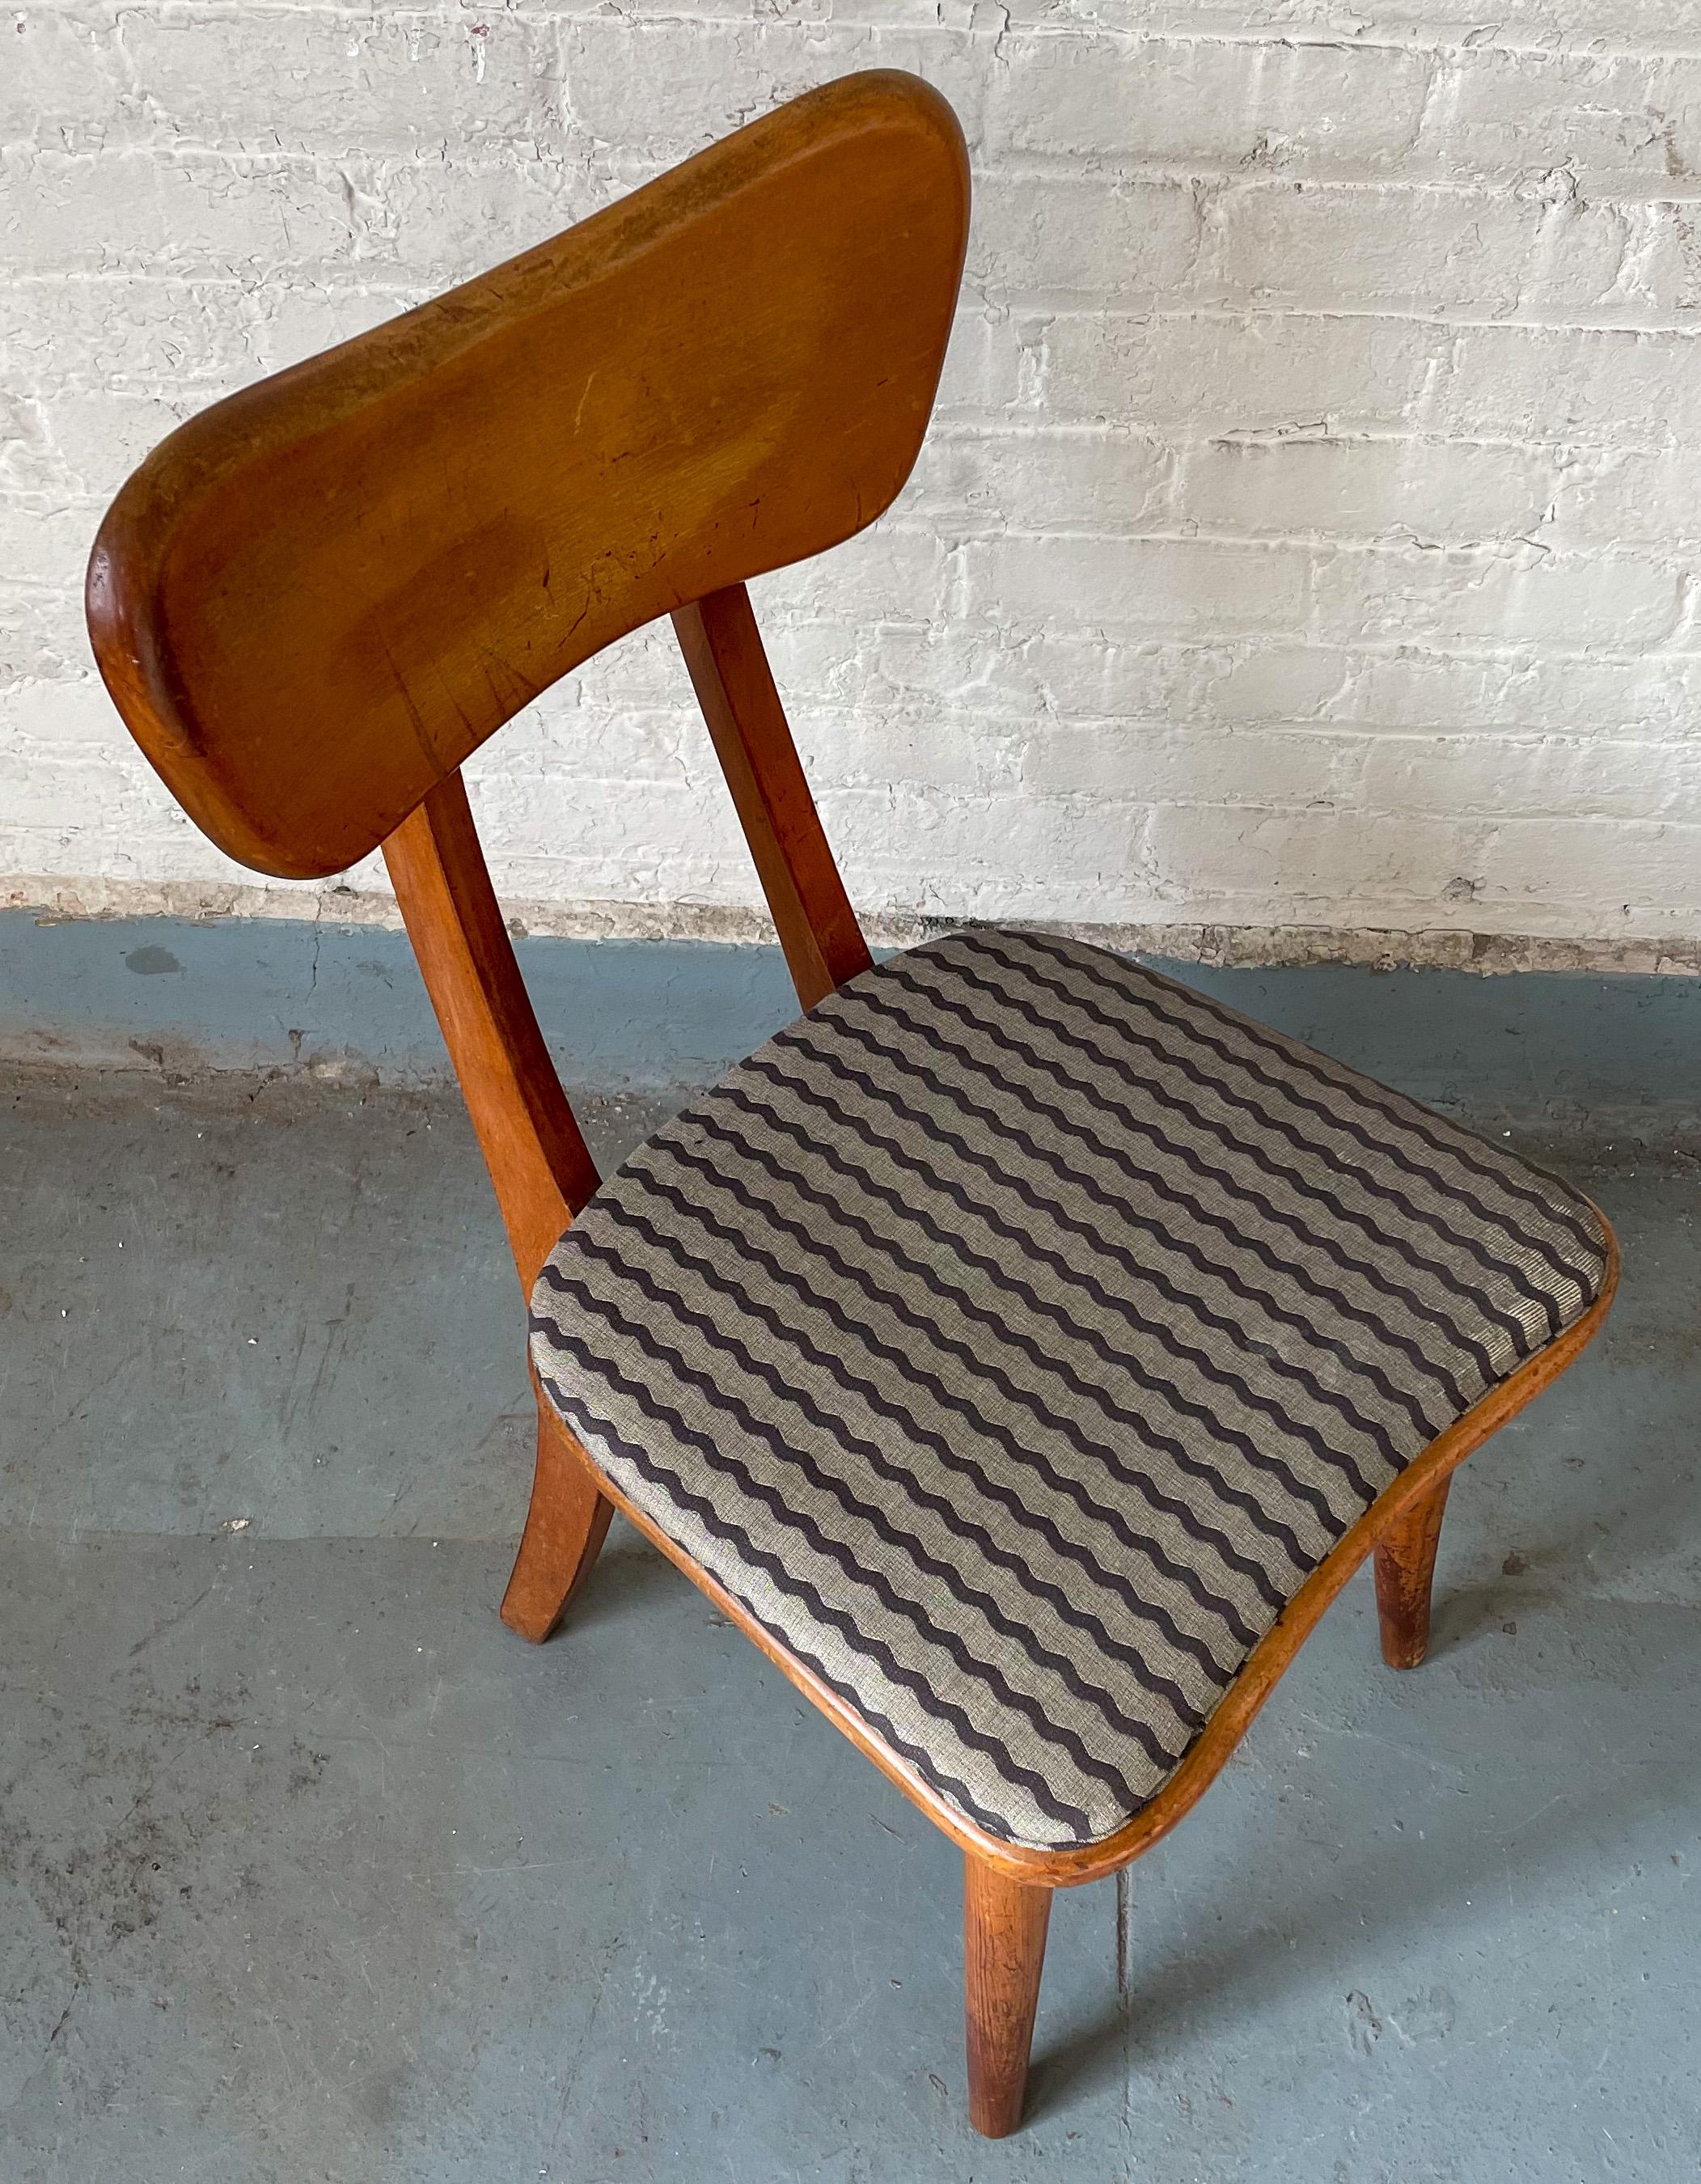 Hatfield/Craig Organic Design Chair In Good Condition For Sale In New York, NY